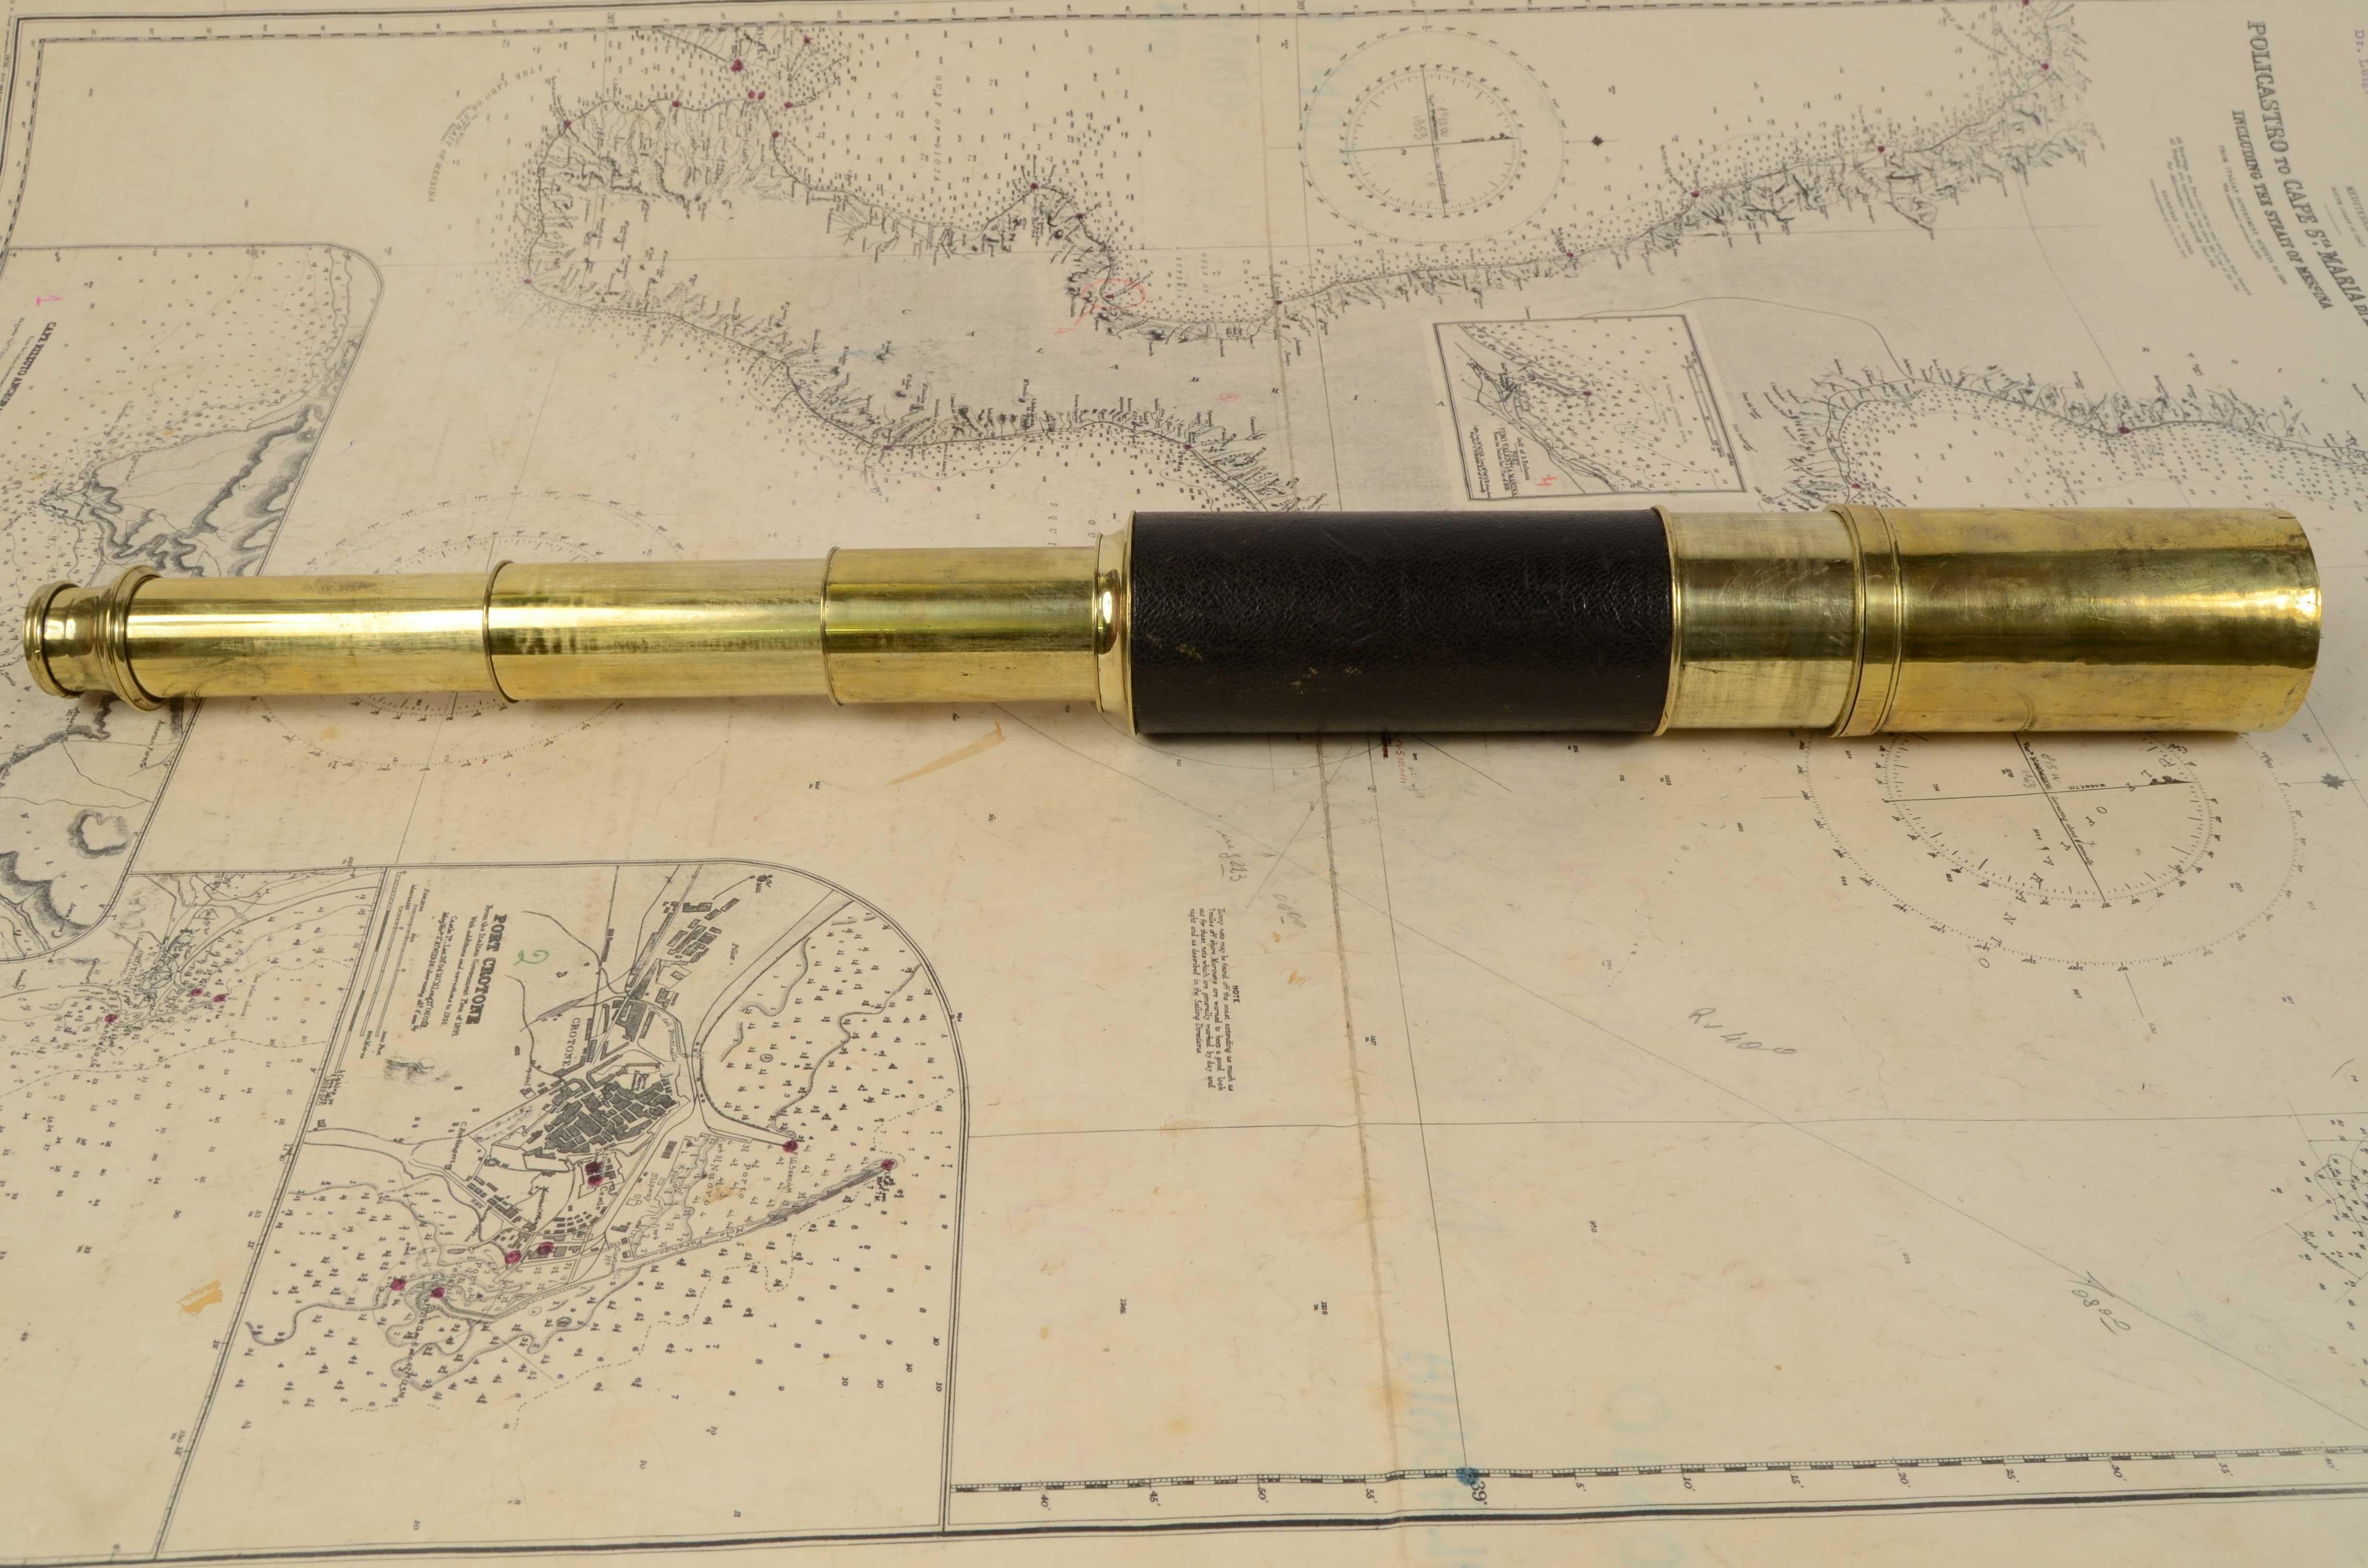 Brass telescope with leather handle, made at the end of the nineteenth century, focusing with three extensions. English manufacture of the second half of the 1800s. Maximum length 99 cm - 39 inches, minimum 30,5 cm - 12 inches, focal diameter 4,5 cm